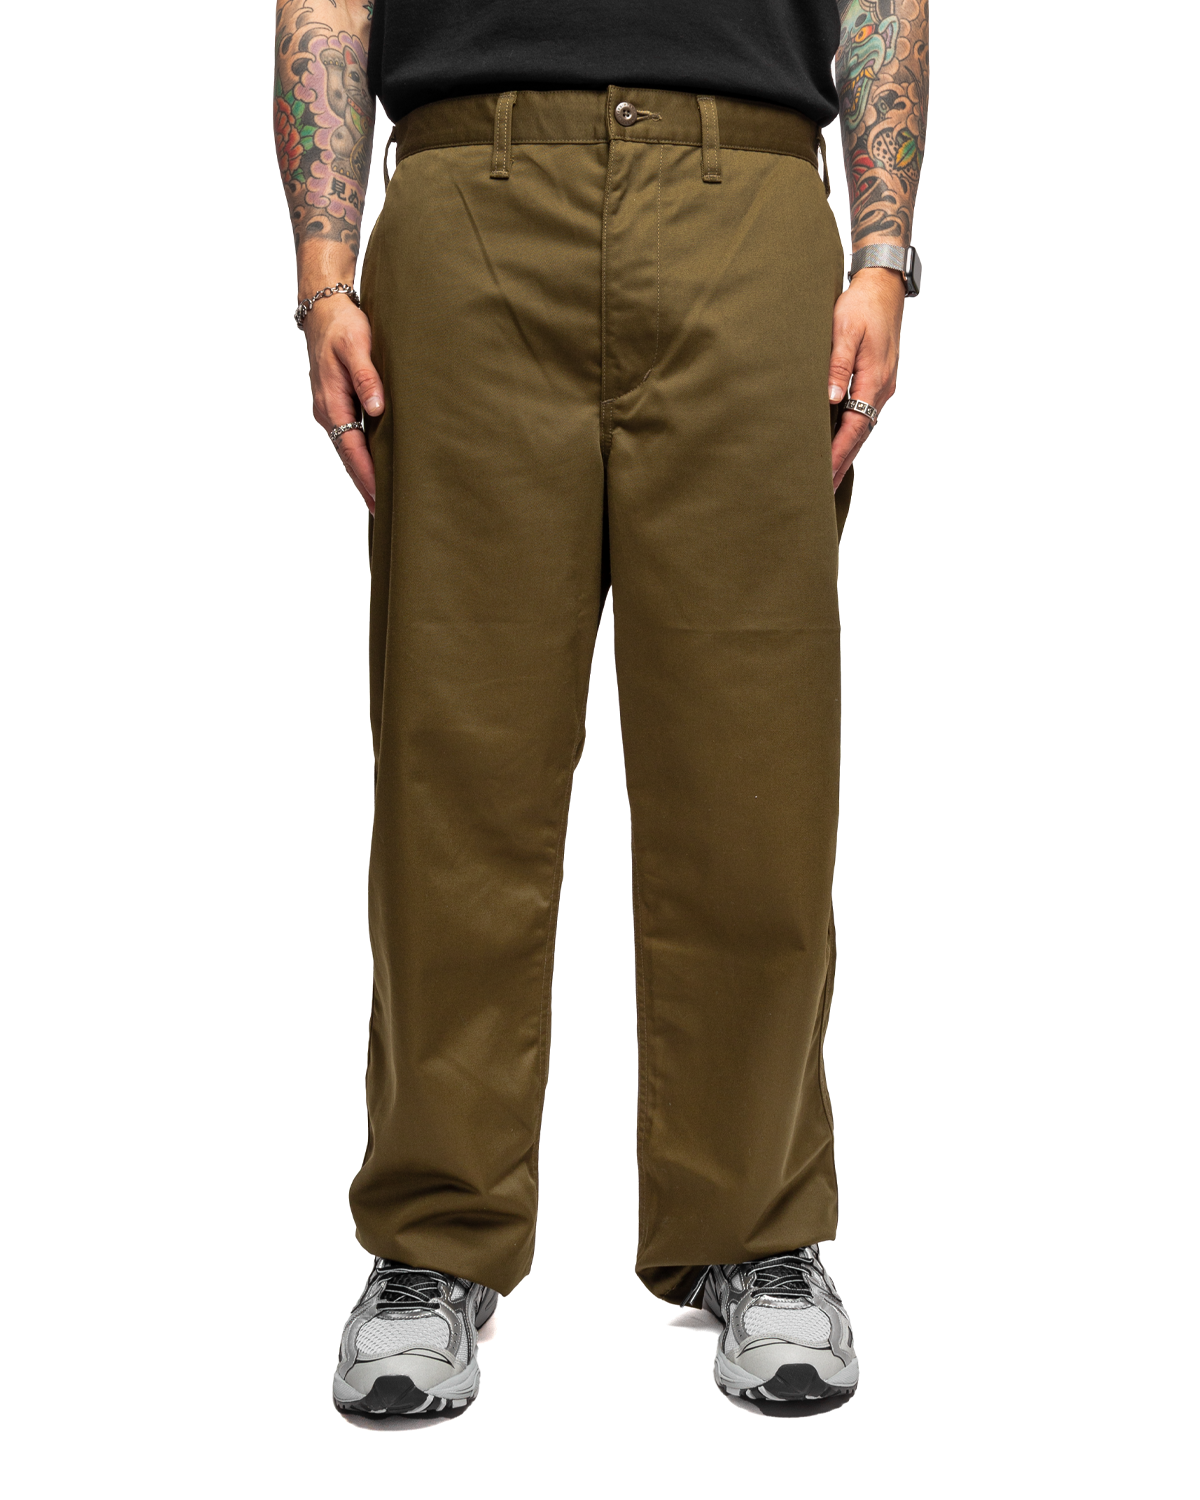 Trousers 05 Olive Drab